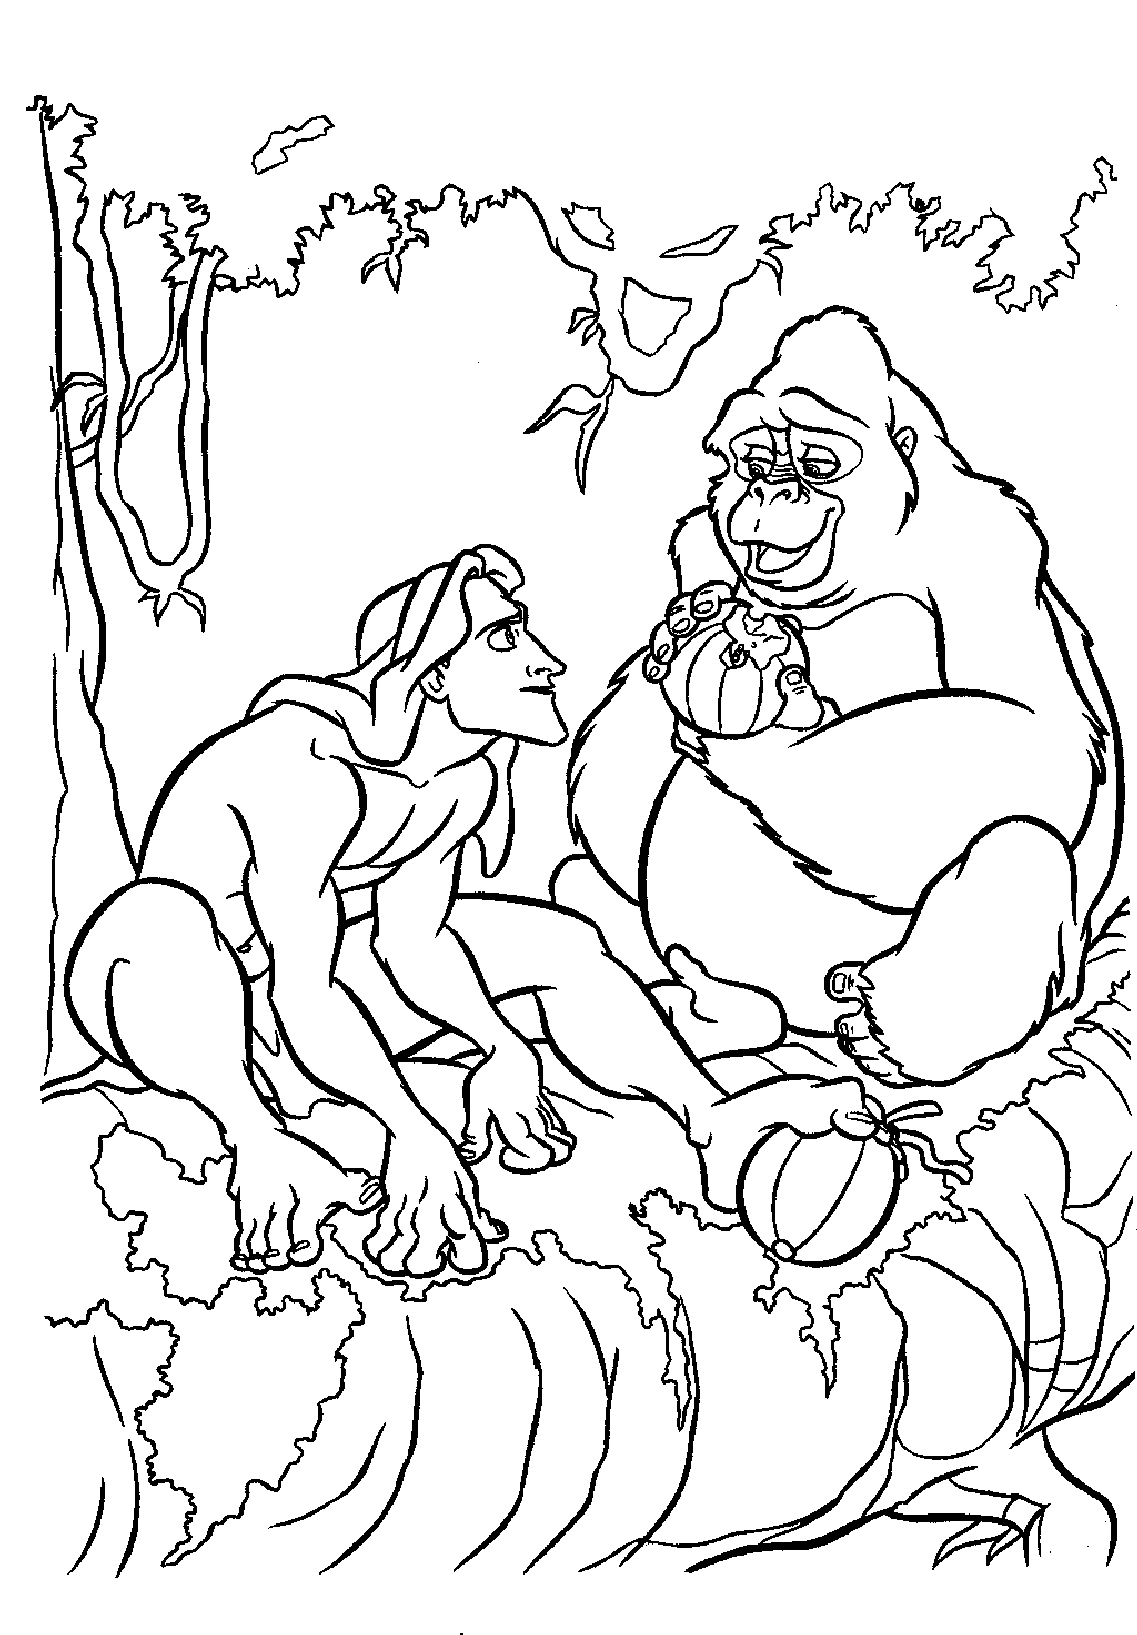 Tarzan adult to color, with his adoptive mother